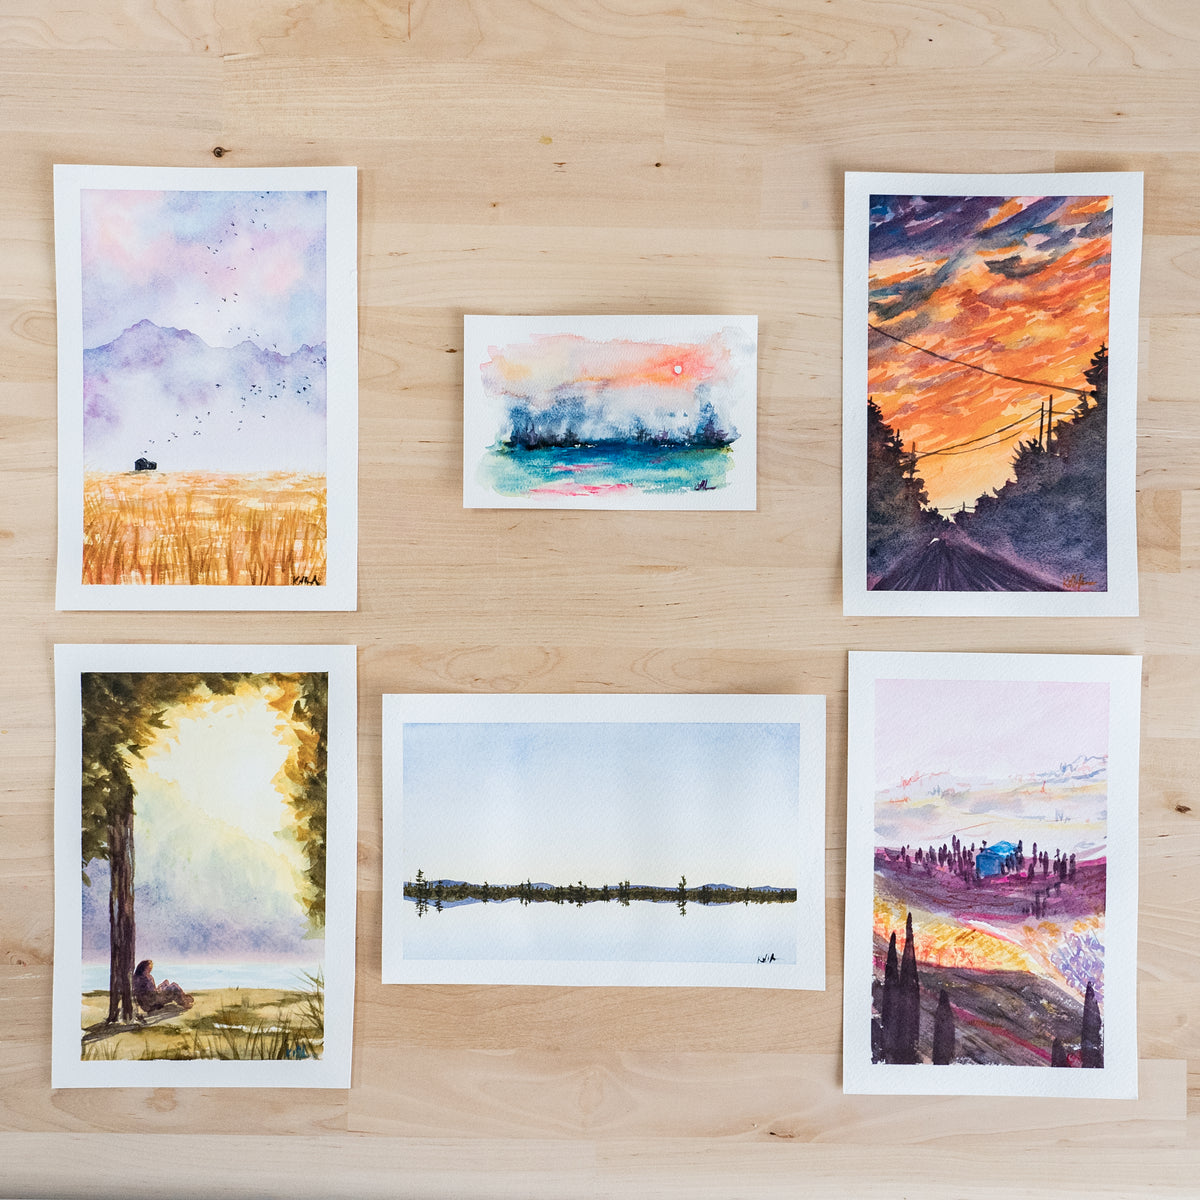 Landscapes　with　Kolbie　Creative　Des–　from　Let's　This　Watercolor　Make　Art　Blume　Writing